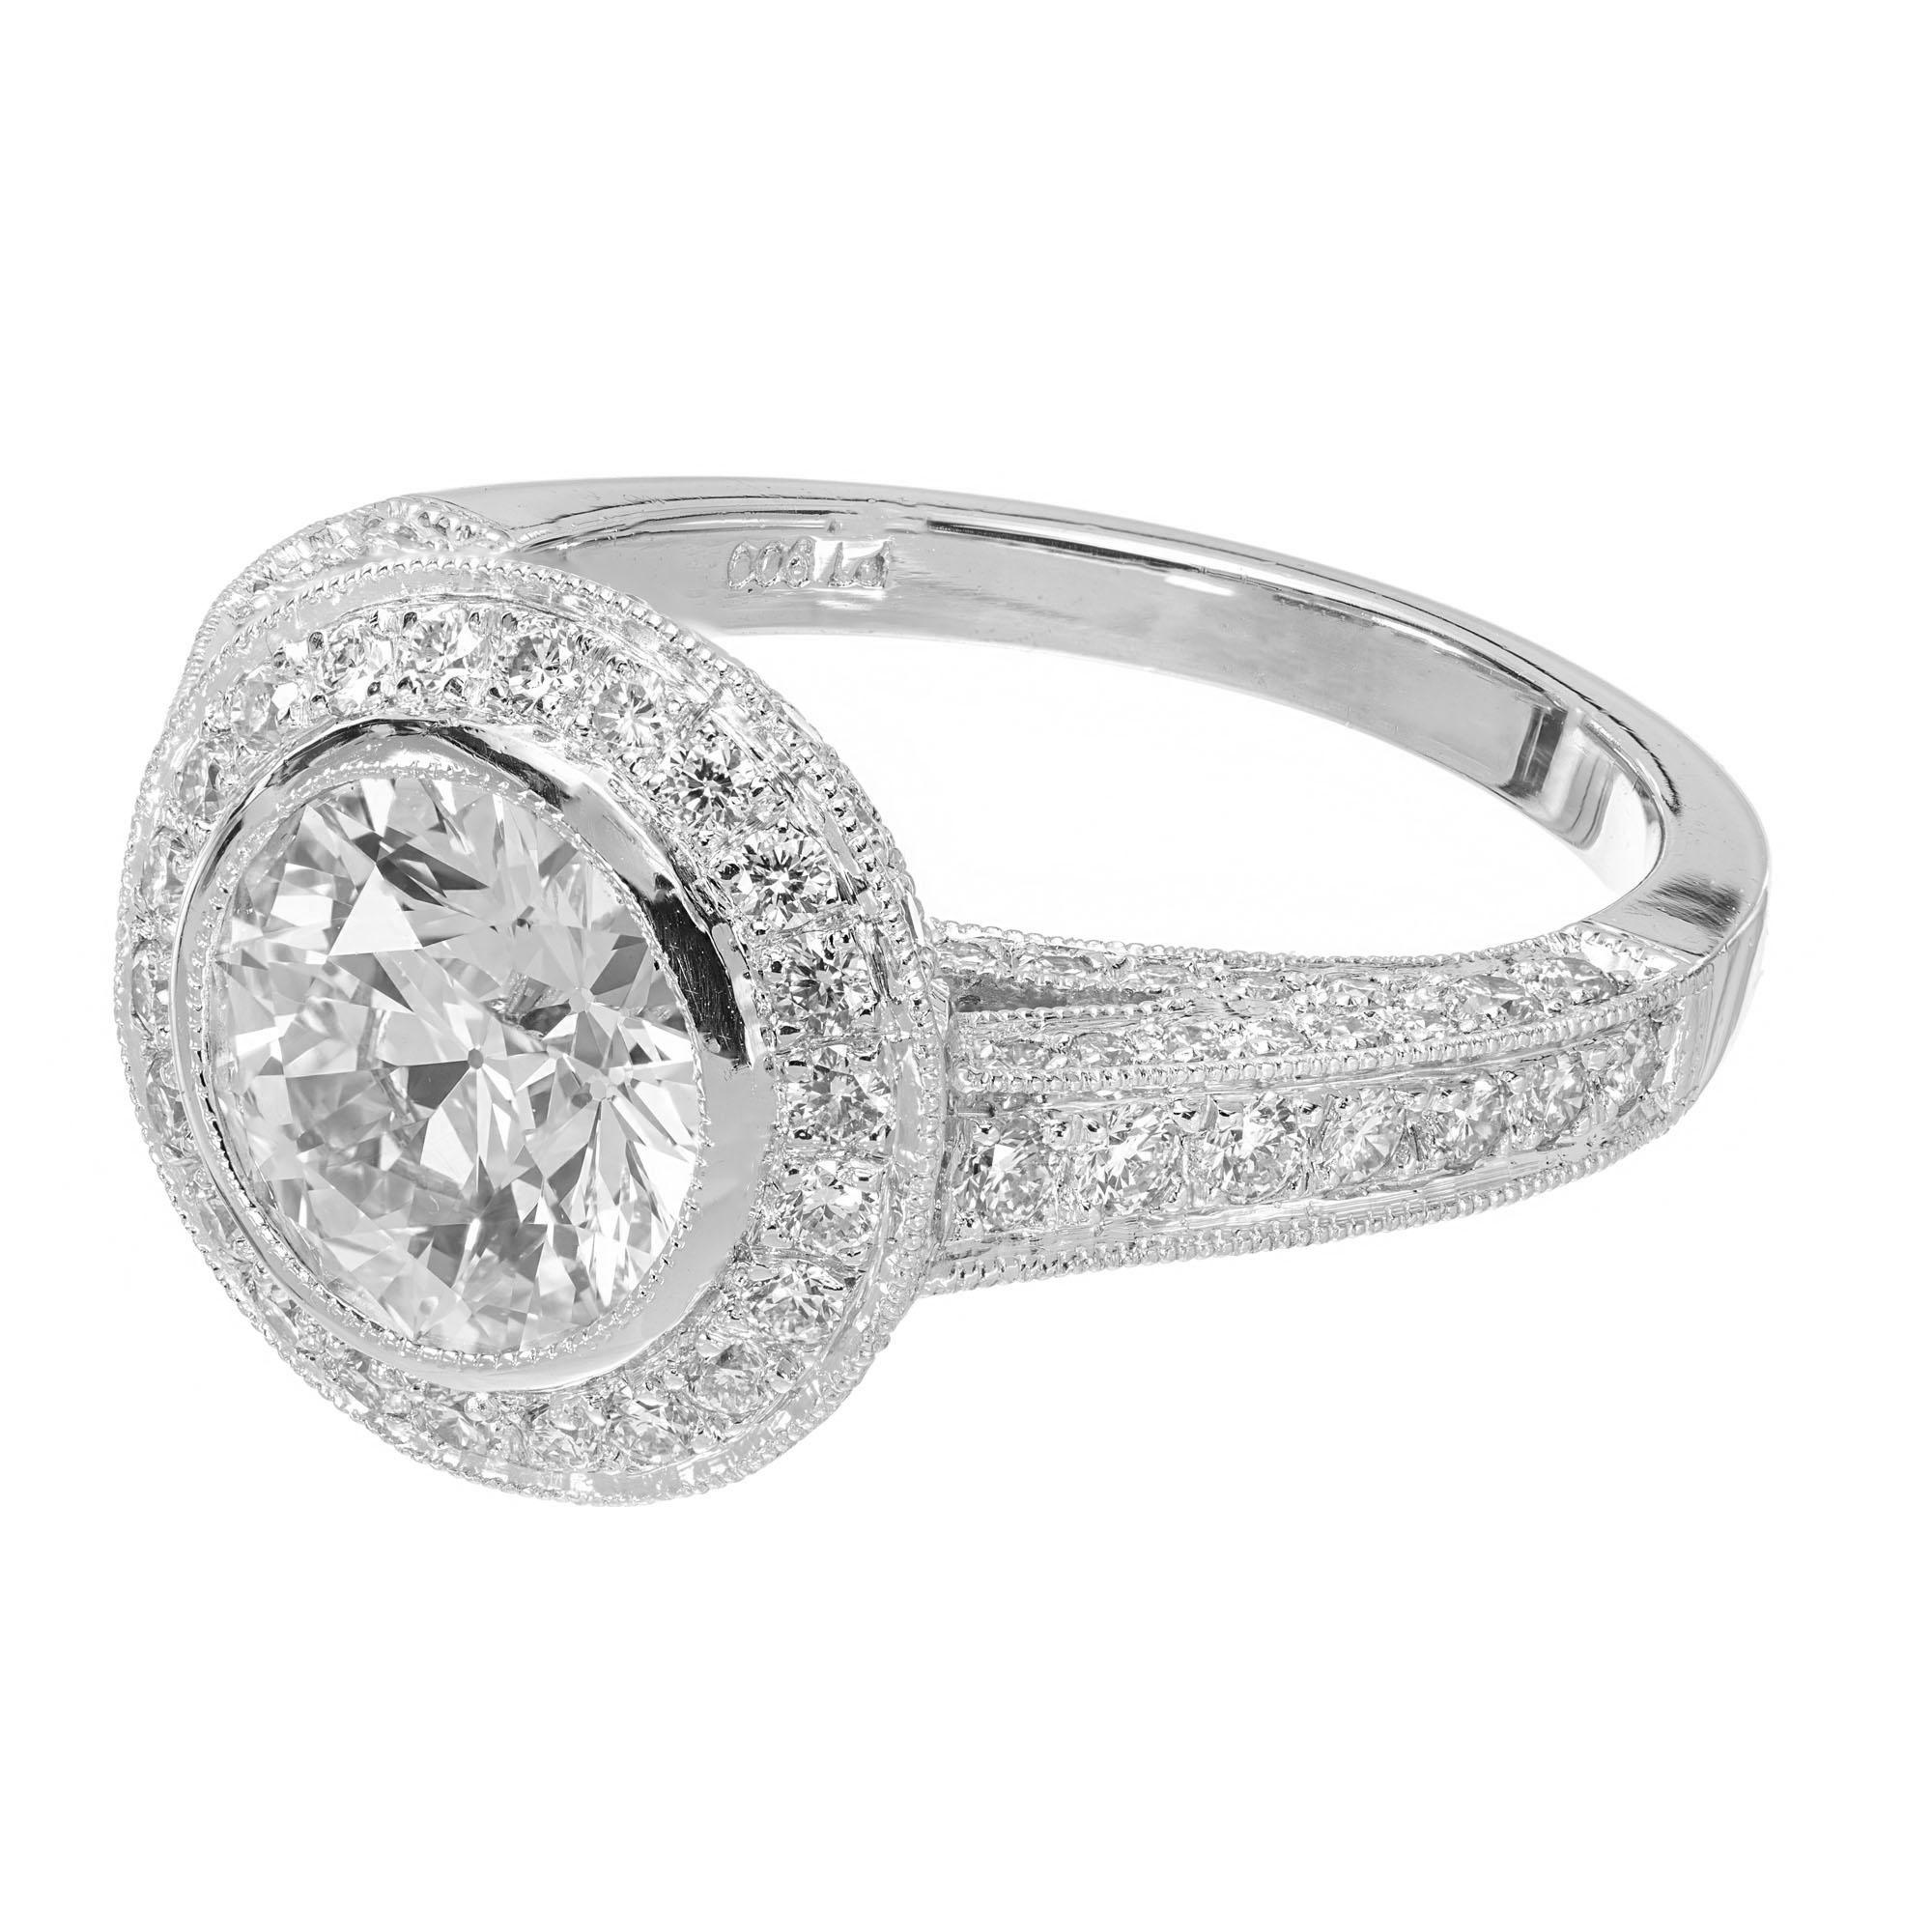 Peter Suchy GIA Certified 1.61 Carat Pave Diamond Halo Platinum Engagement Ring In Excellent Condition For Sale In Stamford, CT